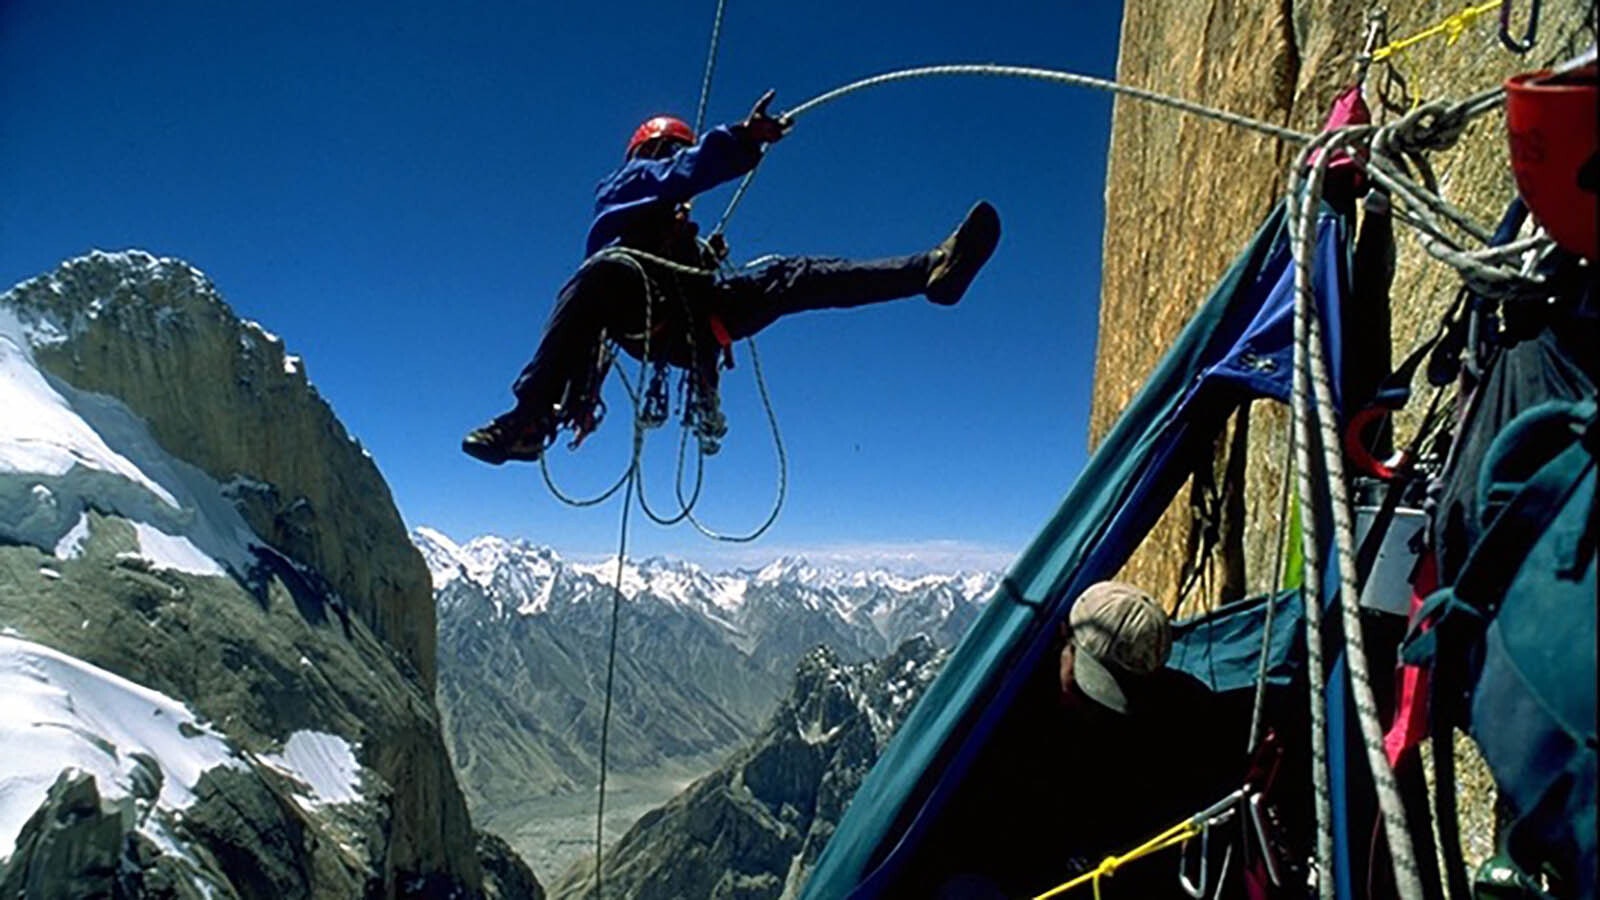 A lot of the ascent up Trango Towers was spent on sheer rock faces and narrow ledges.